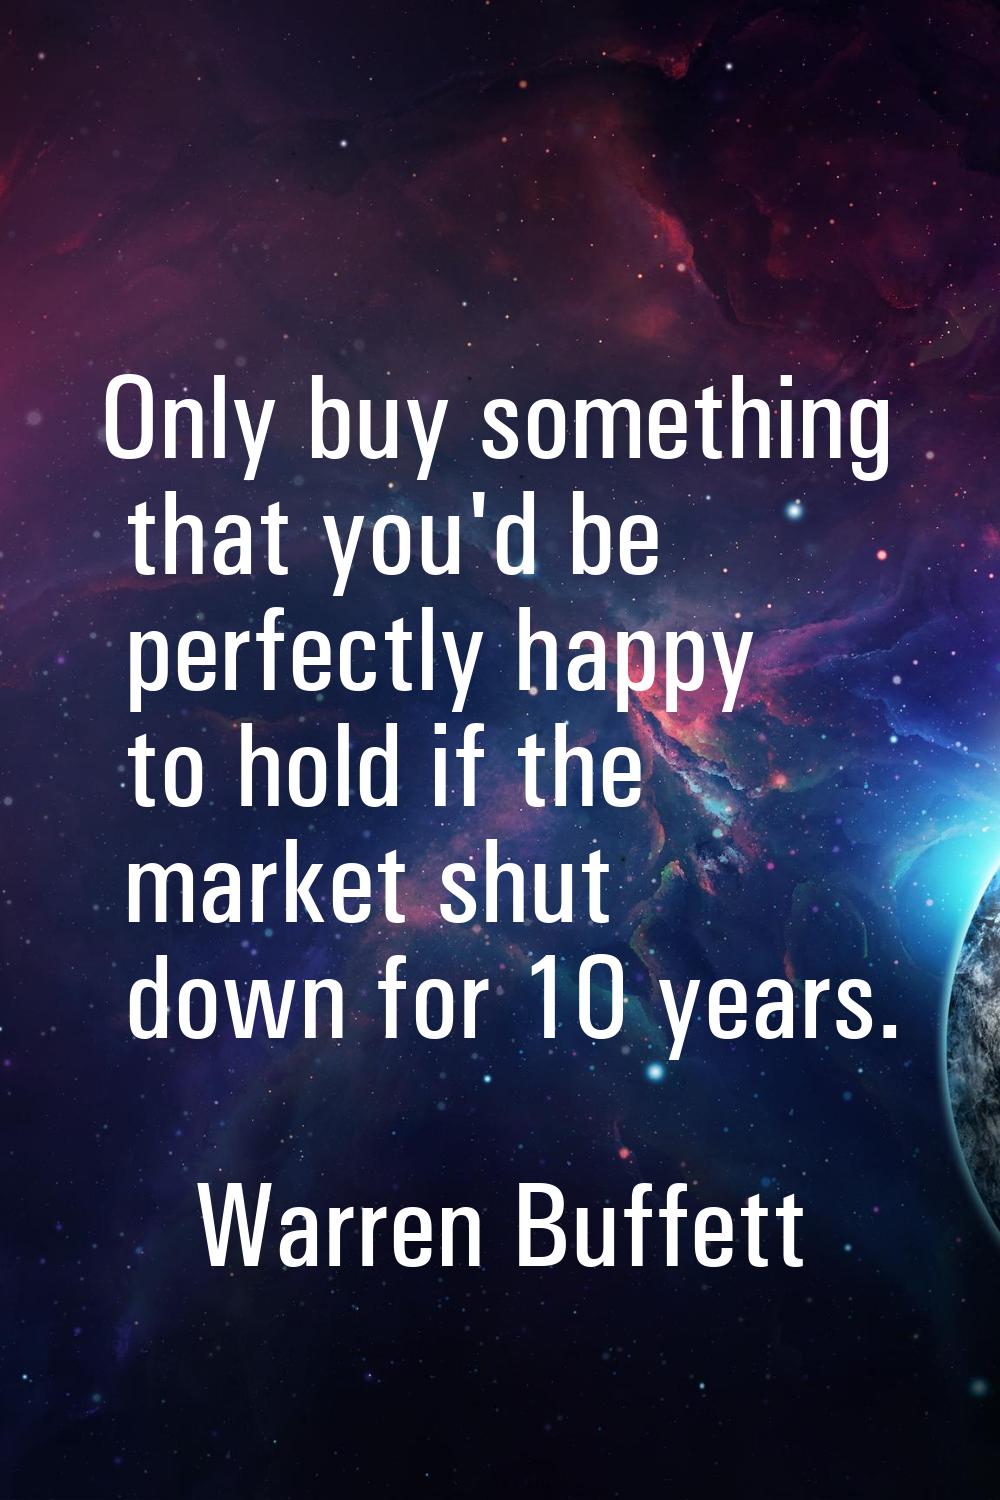 Only buy something that you'd be perfectly happy to hold if the market shut down for 10 years.